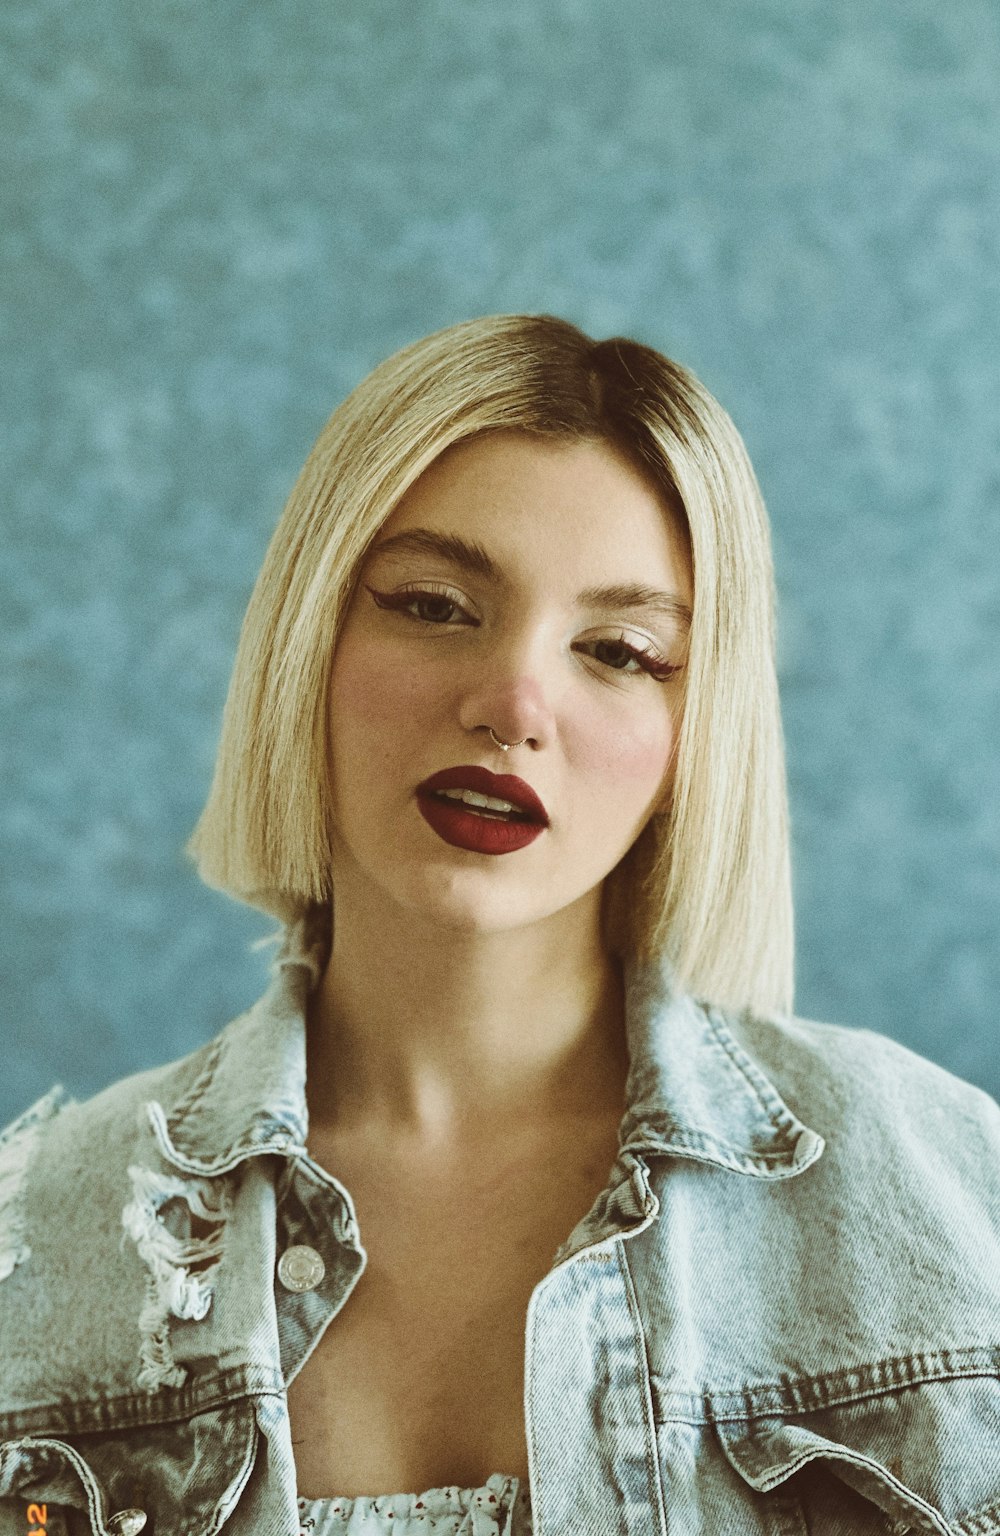 a woman wearing a jean jacket and red lipstick